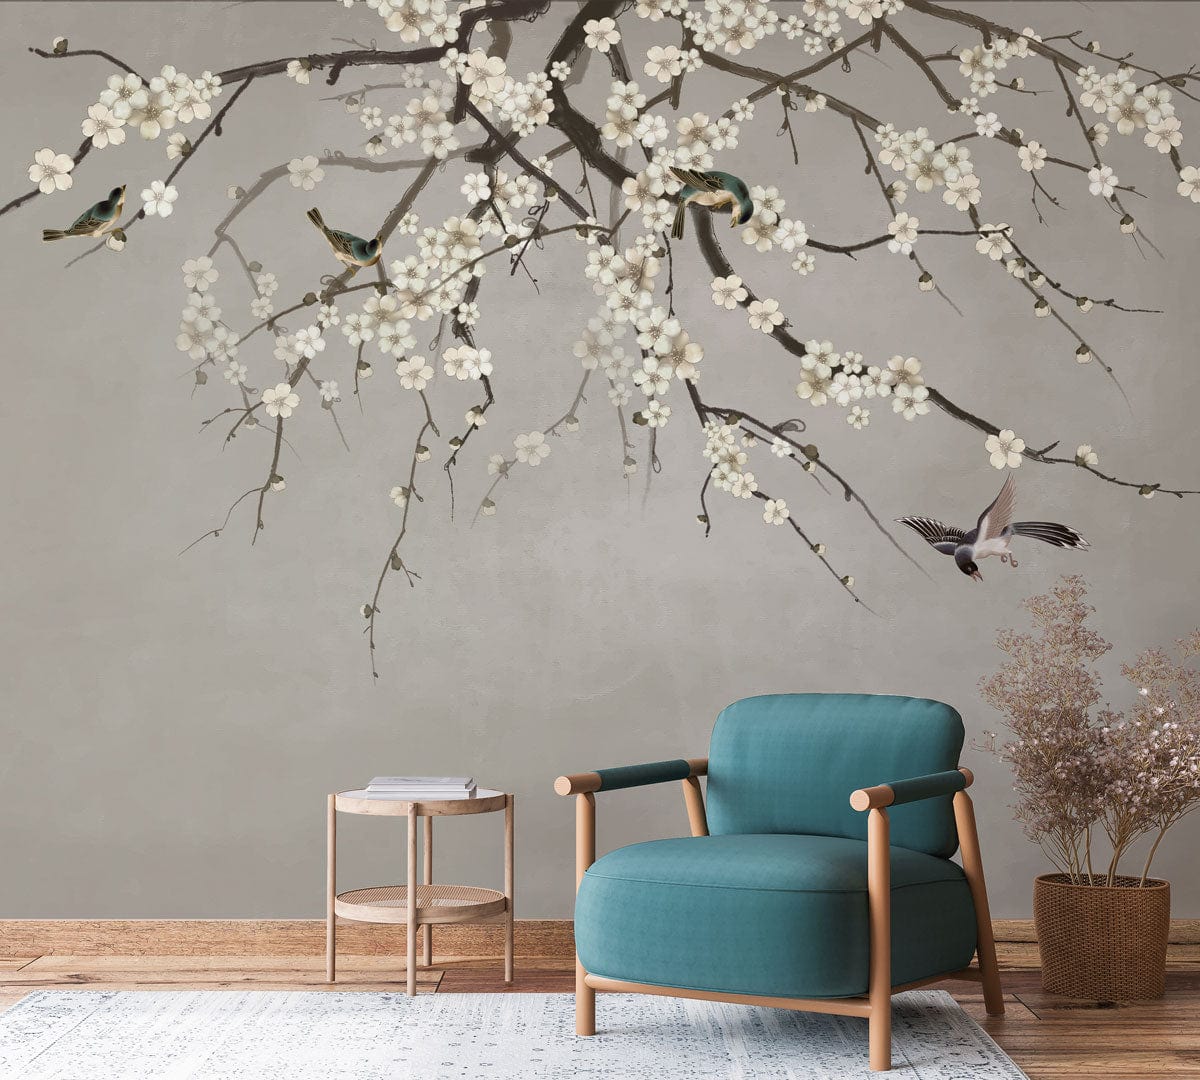 Vintage Large Birch Tree Wallpaper For Living Room Bedroom Cafe Modern  Design Wall Sticker Roll Rustic Forest Woods Home Decal - Wall Stickers -  AliExpress